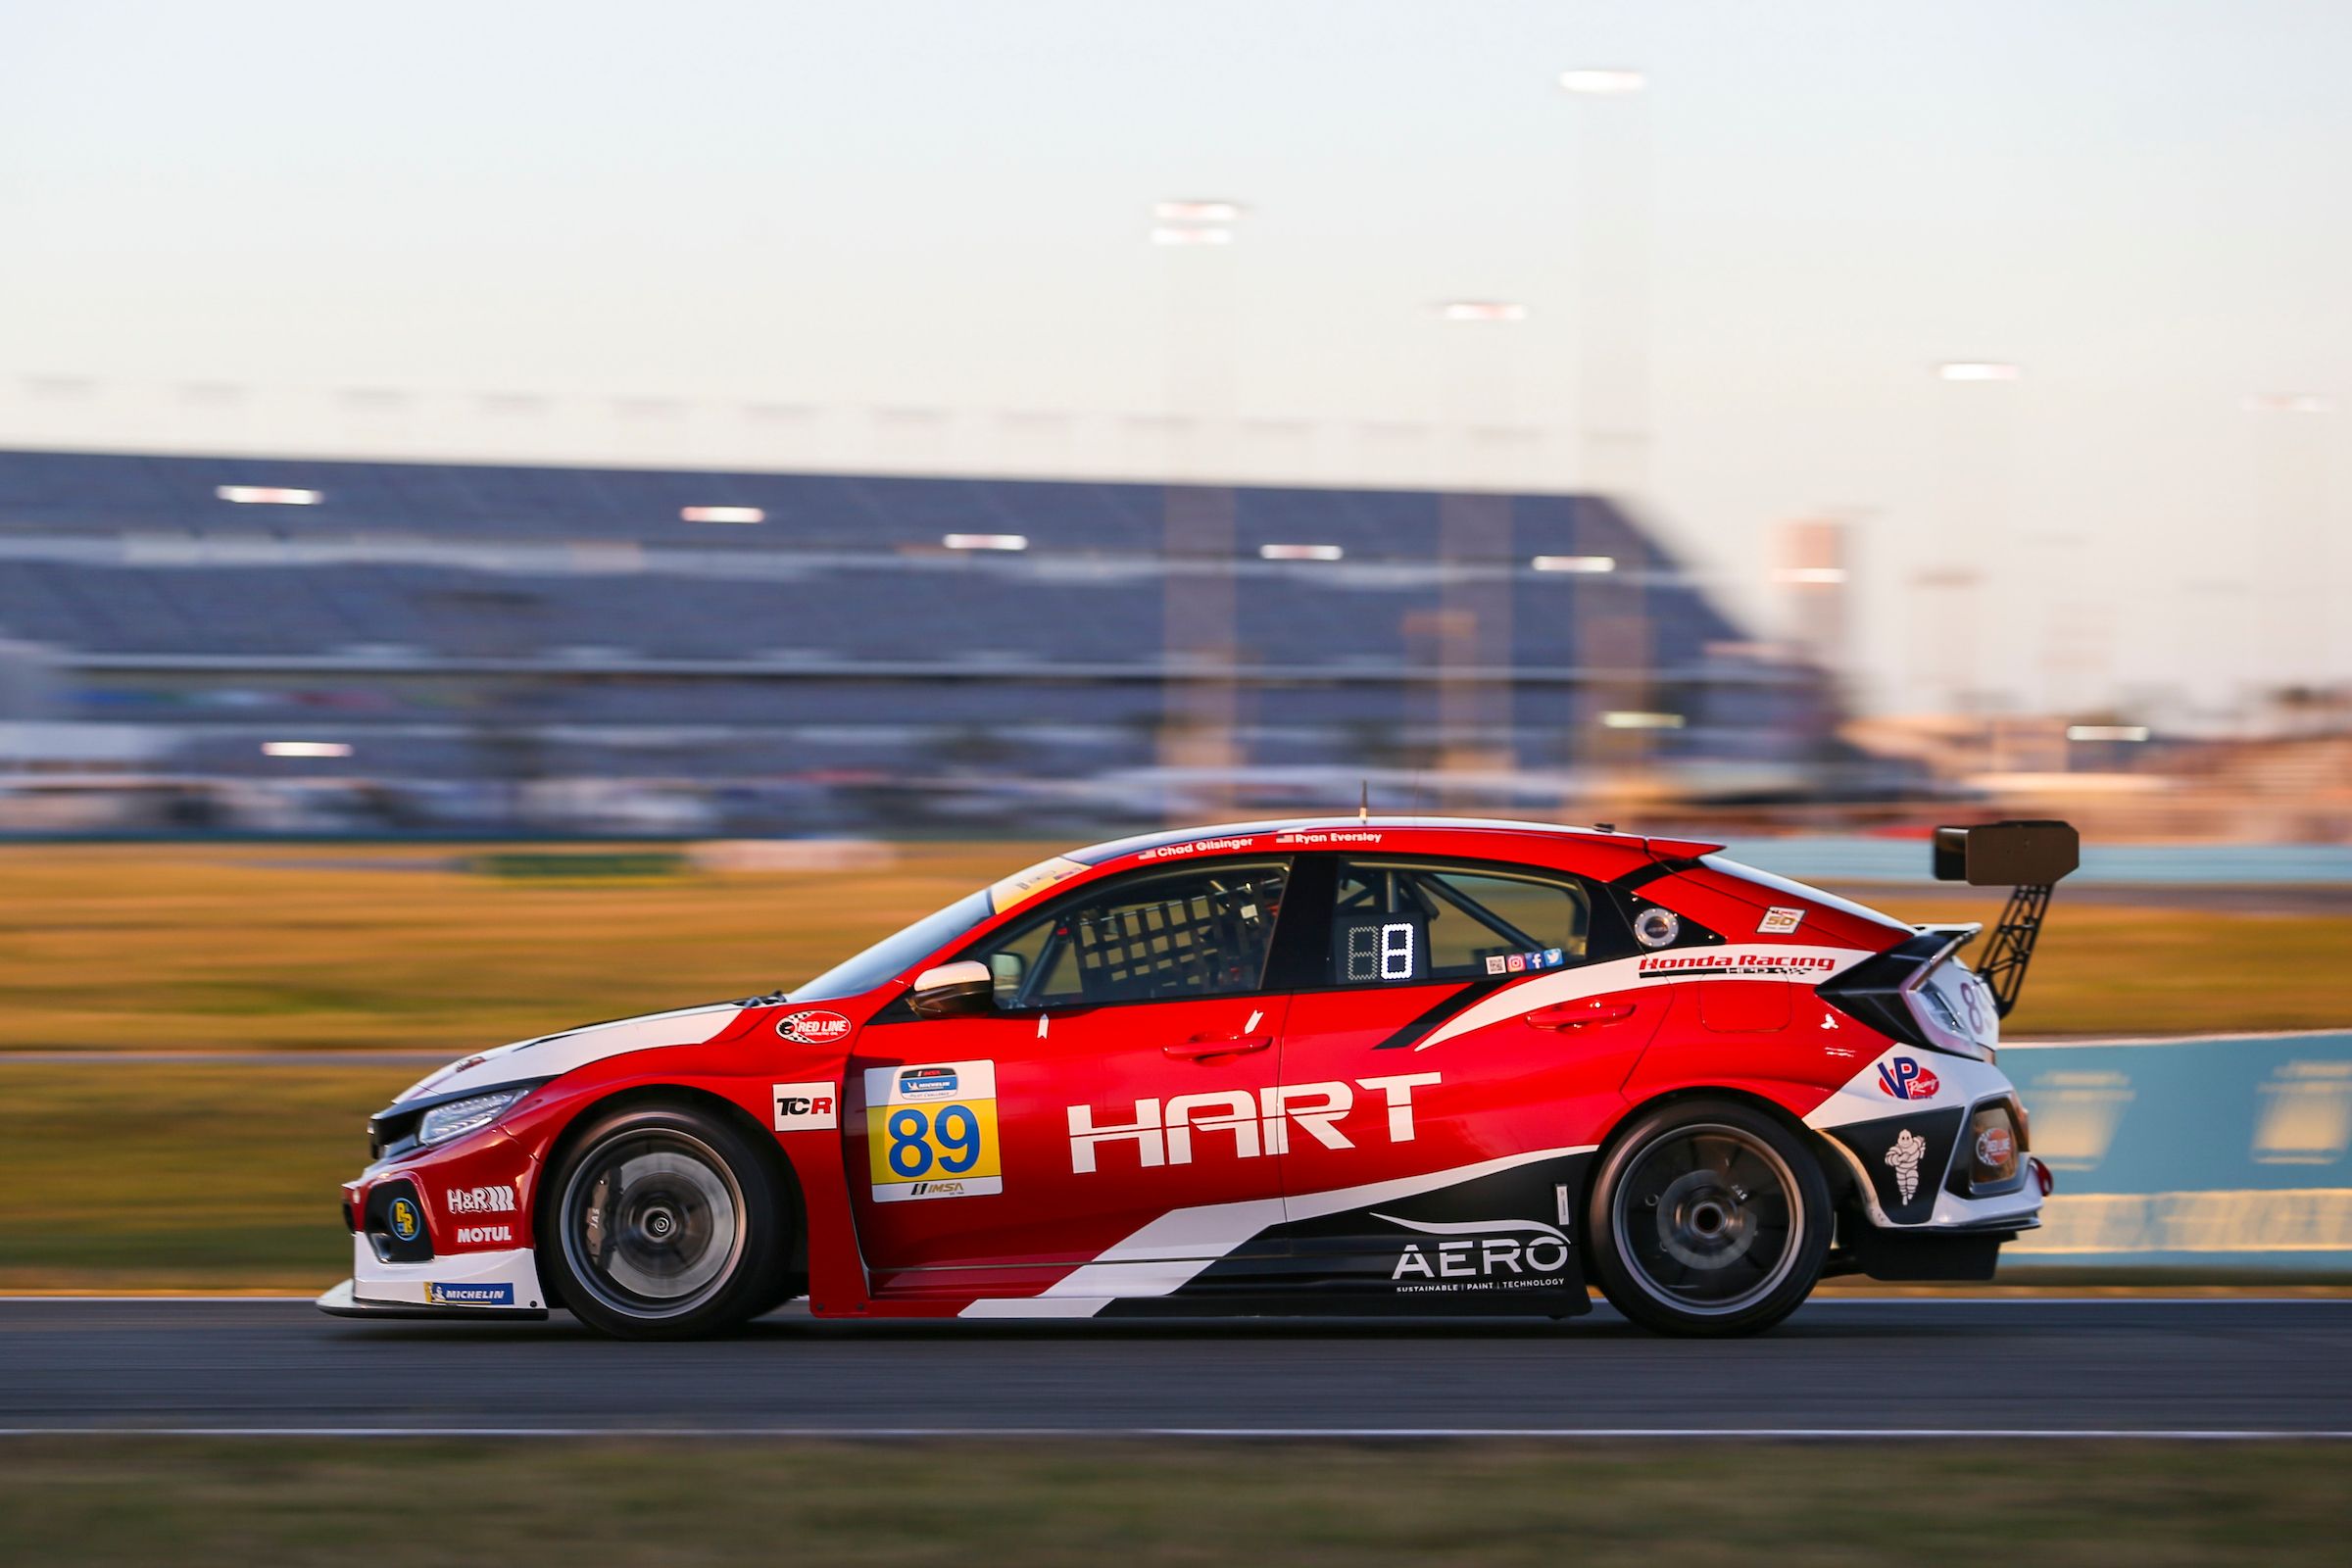 2019 Honda Civic Type R TCR race car. What it's like to drive.